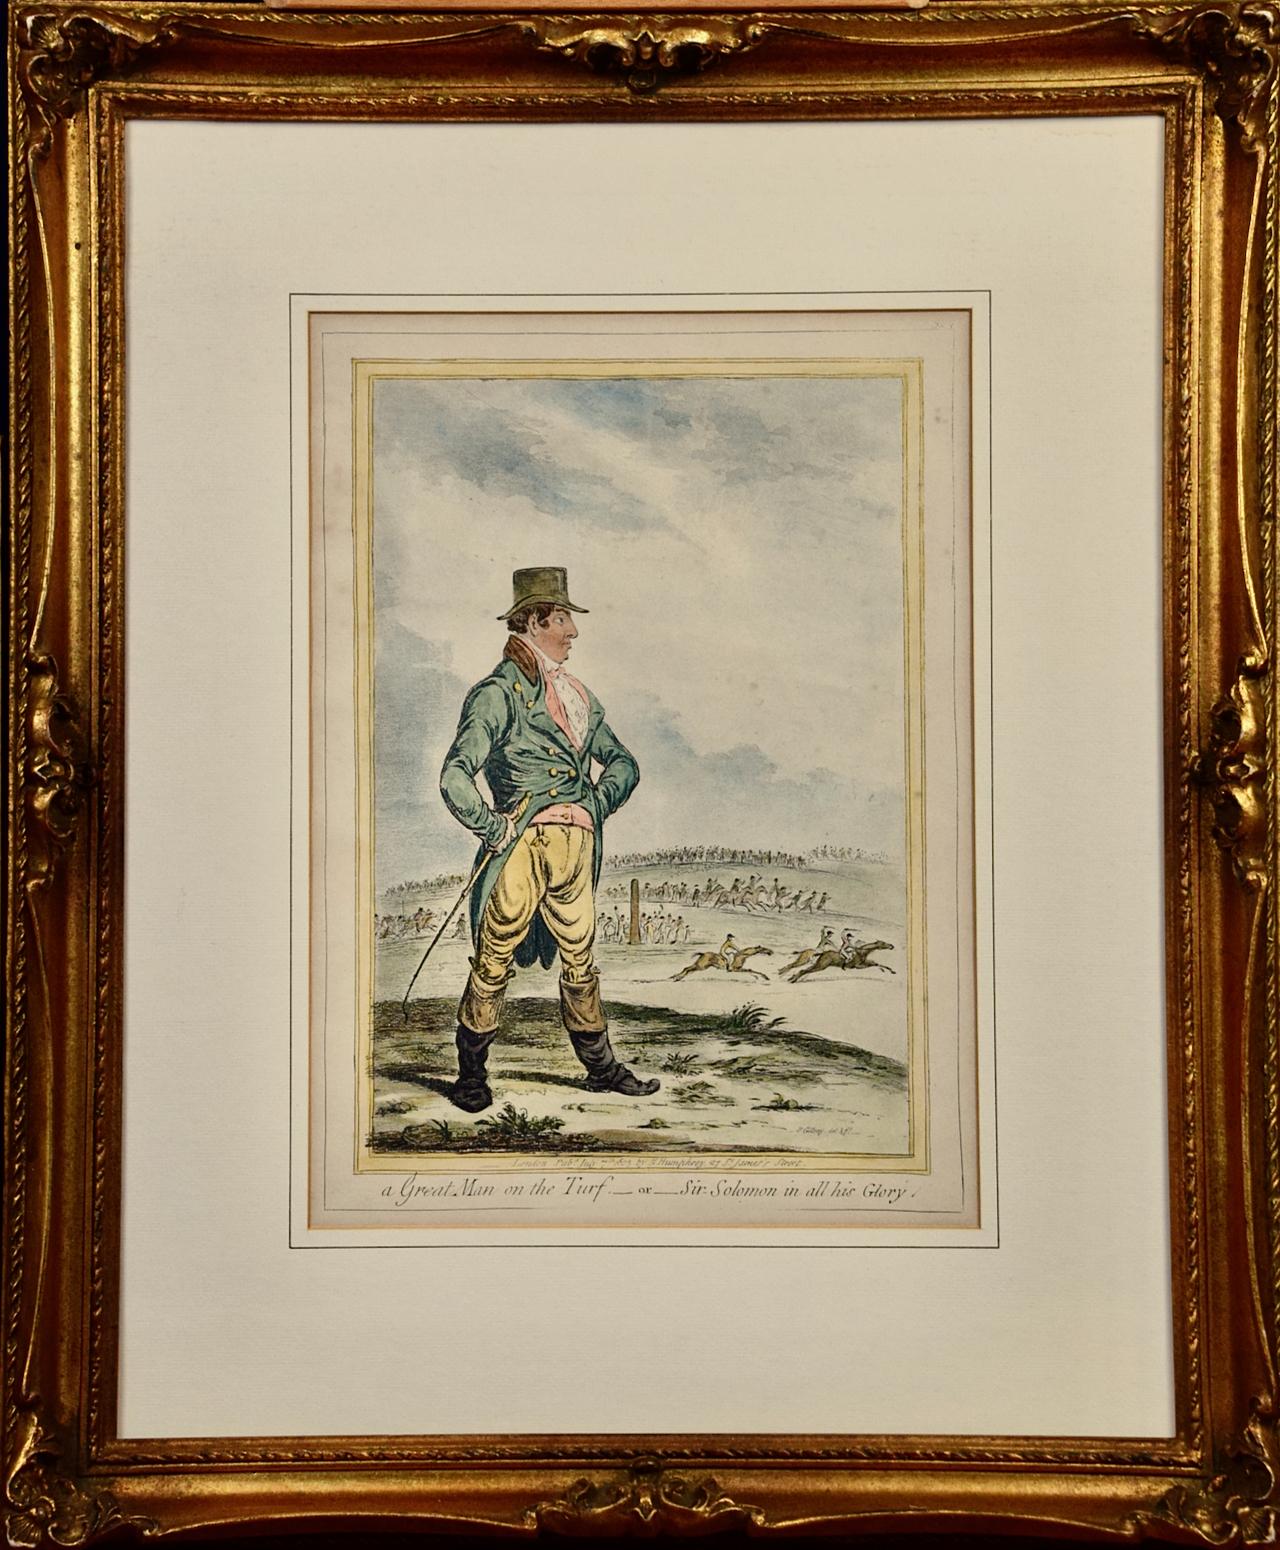 "A Great Man on The Turf": A 19th Century James Gillray Hand-colored Etching